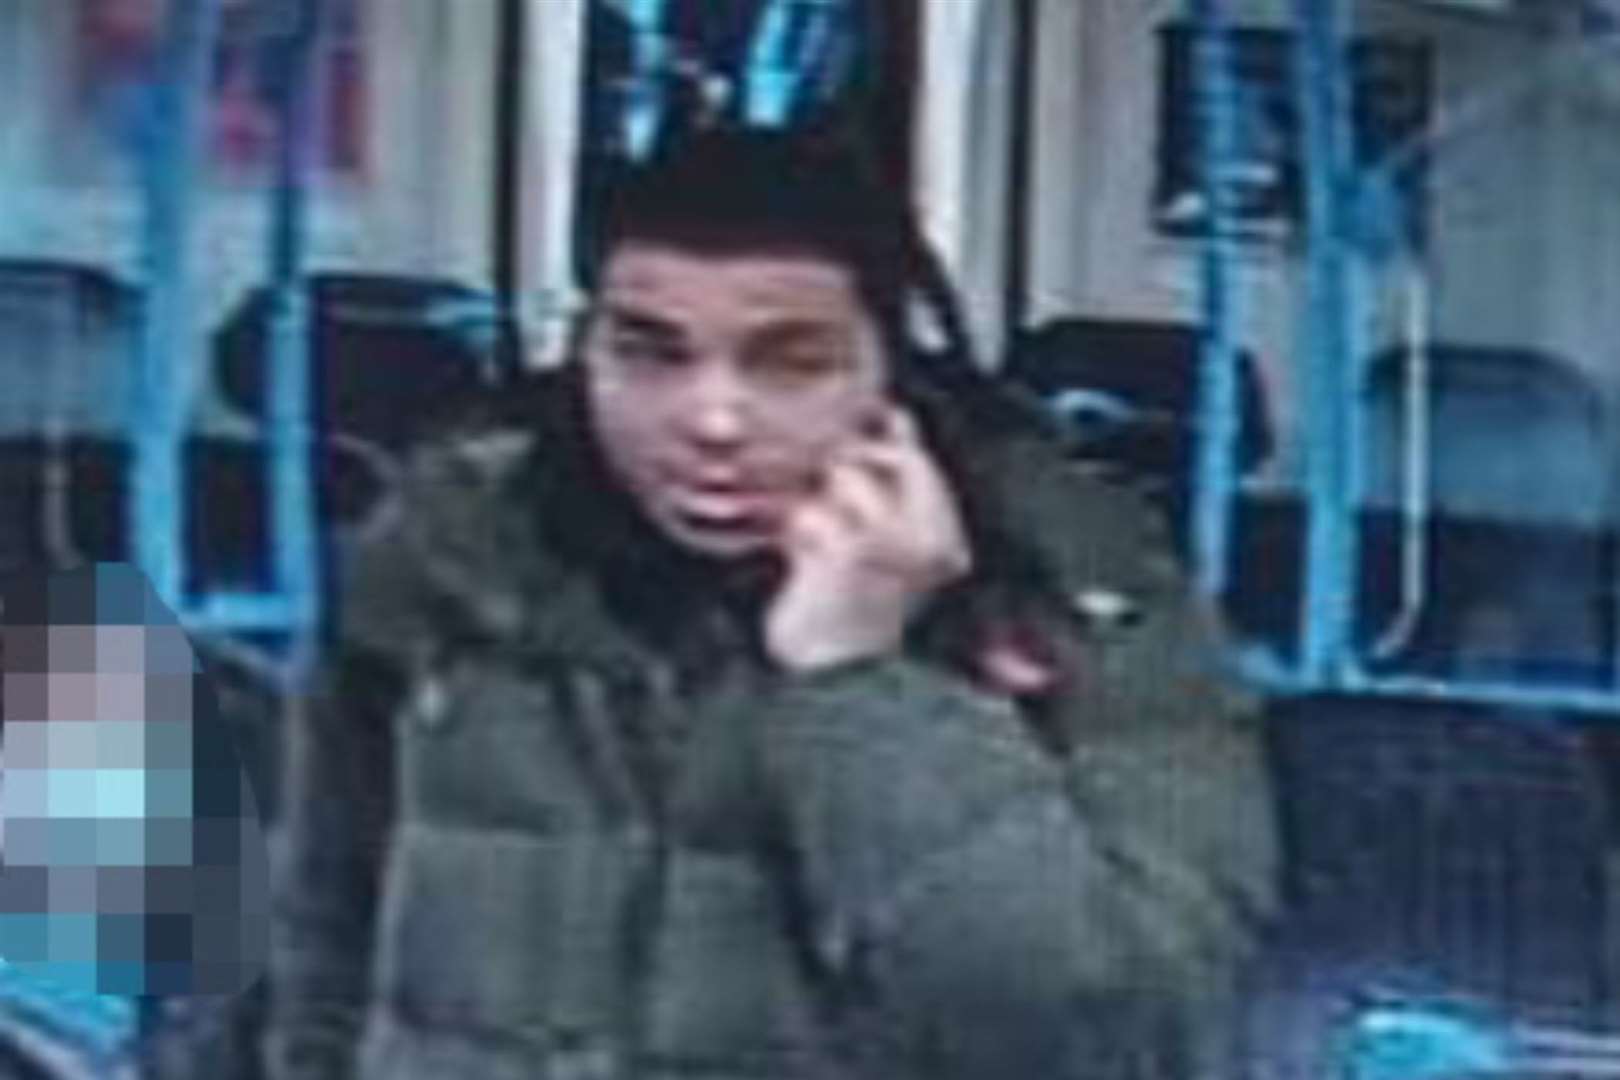 Courtney Cann pictured on train CCTV. Picture: Kent Police